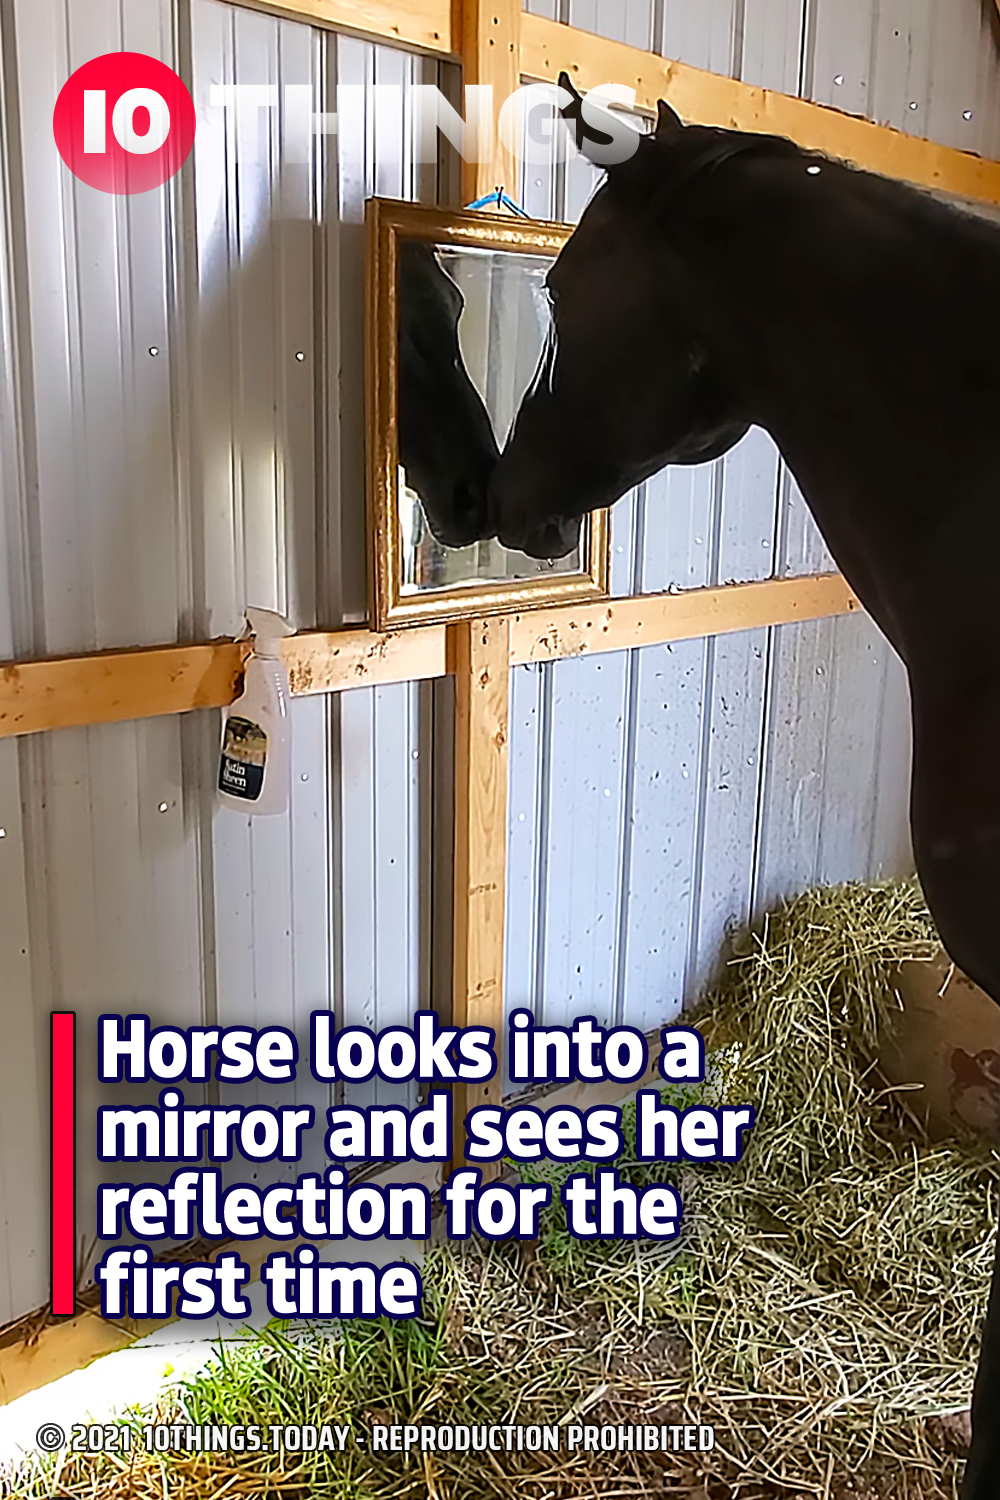 Horse looks into a mirror and sees her reflection for the first time